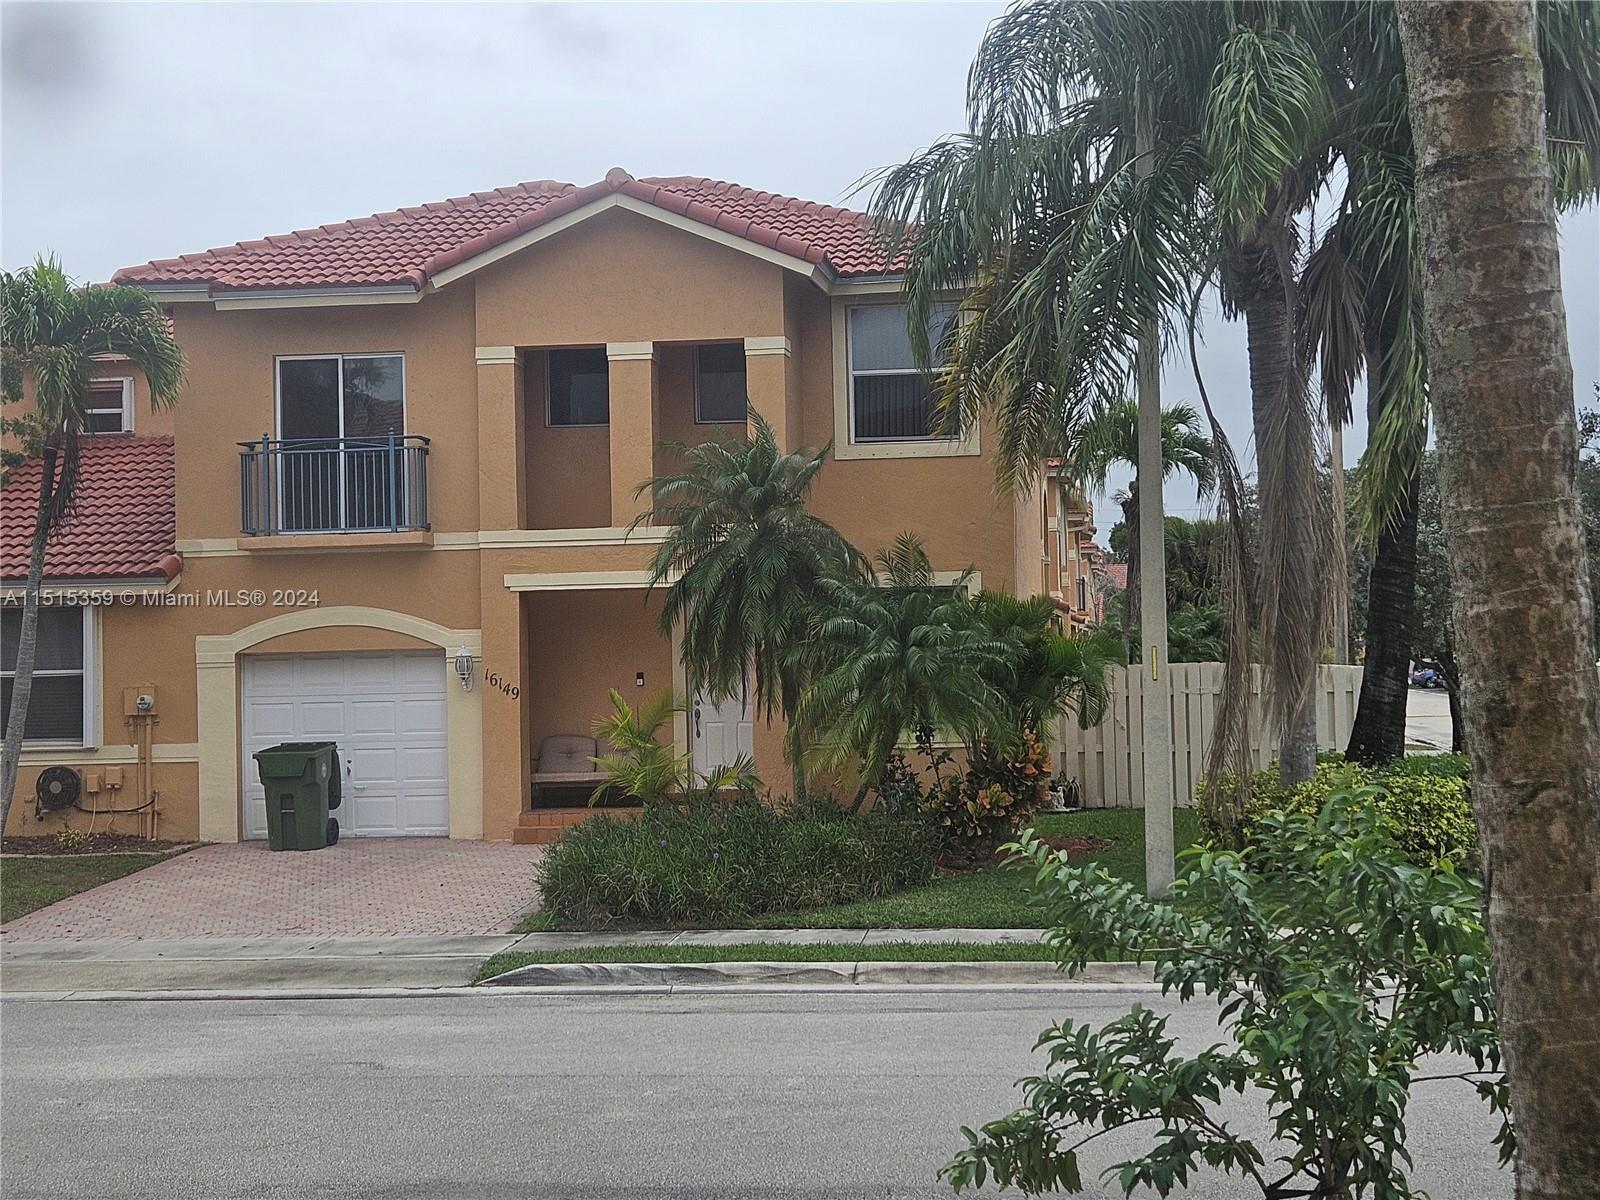 Photo of 16149 NW 22nd St #16149 in Pembroke Pines, FL